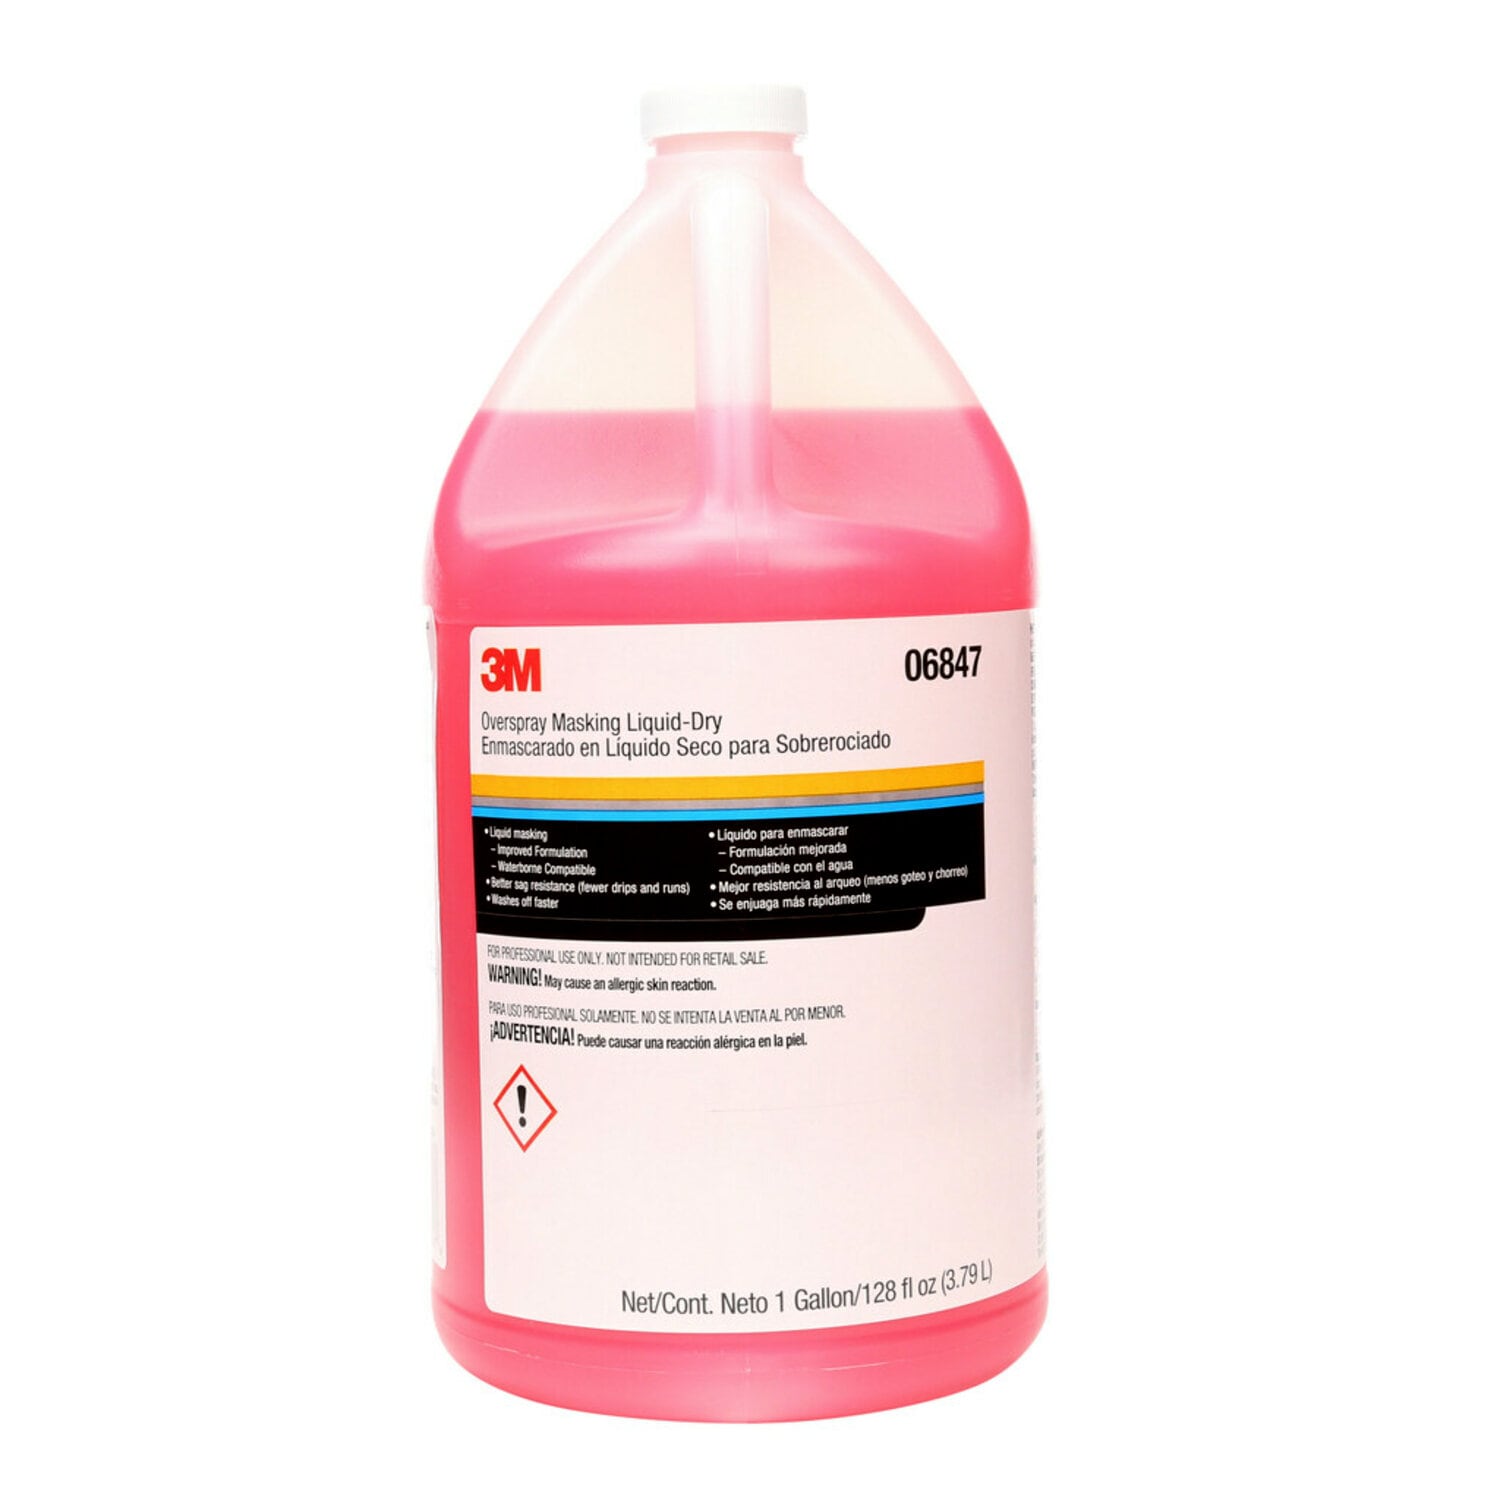 00051131068476 | 3M Overspray Masking Liquid Dry, 06847, 1 Gallon, 4 per  case | Aircraft products | 3M | 9367227